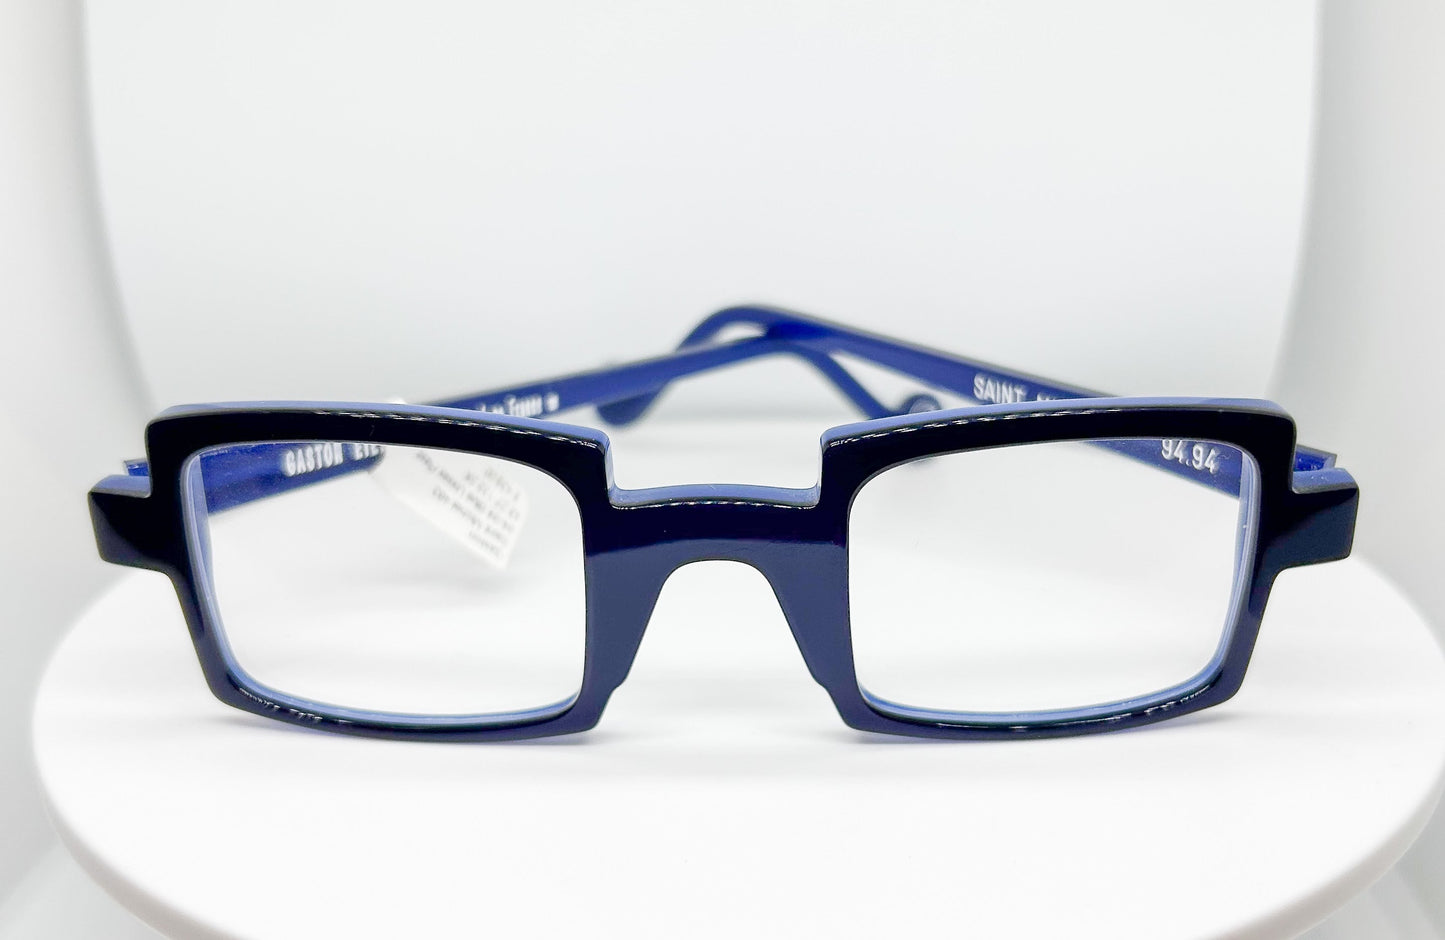 Buy Gaston Eyewear - Saint Michel, a  Navy; Acetate Optical Frame with a Square shape. An Authorized Dealer, Adair Eyewear has a 40+ Years History of Customer Service Excellence